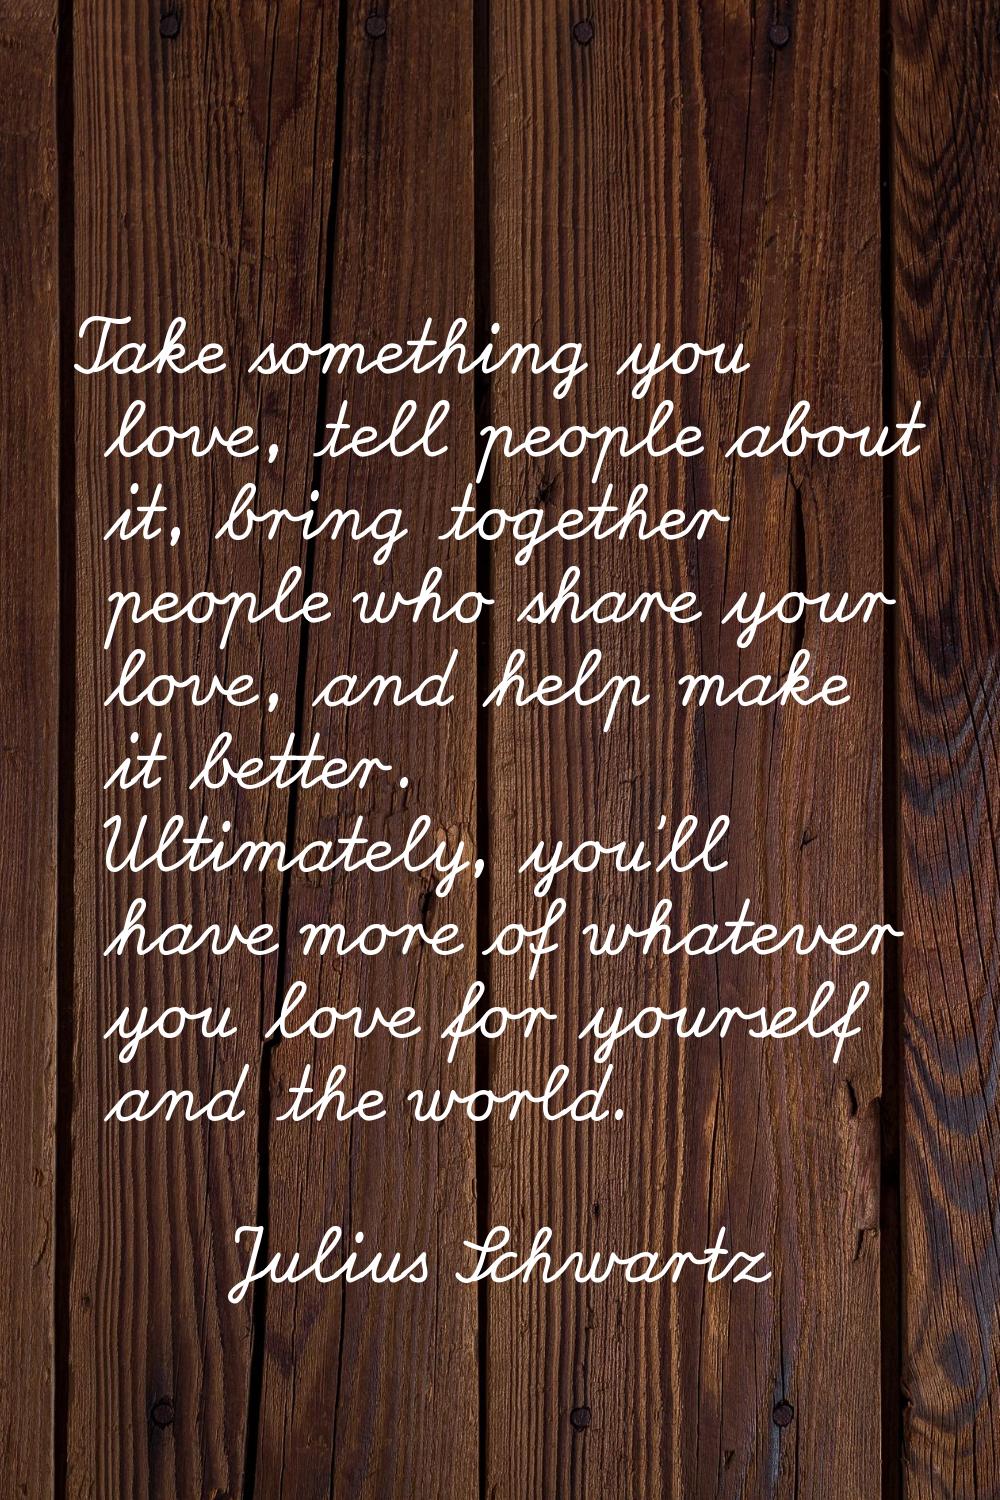 Take something you love, tell people about it, bring together people who share your love, and help 